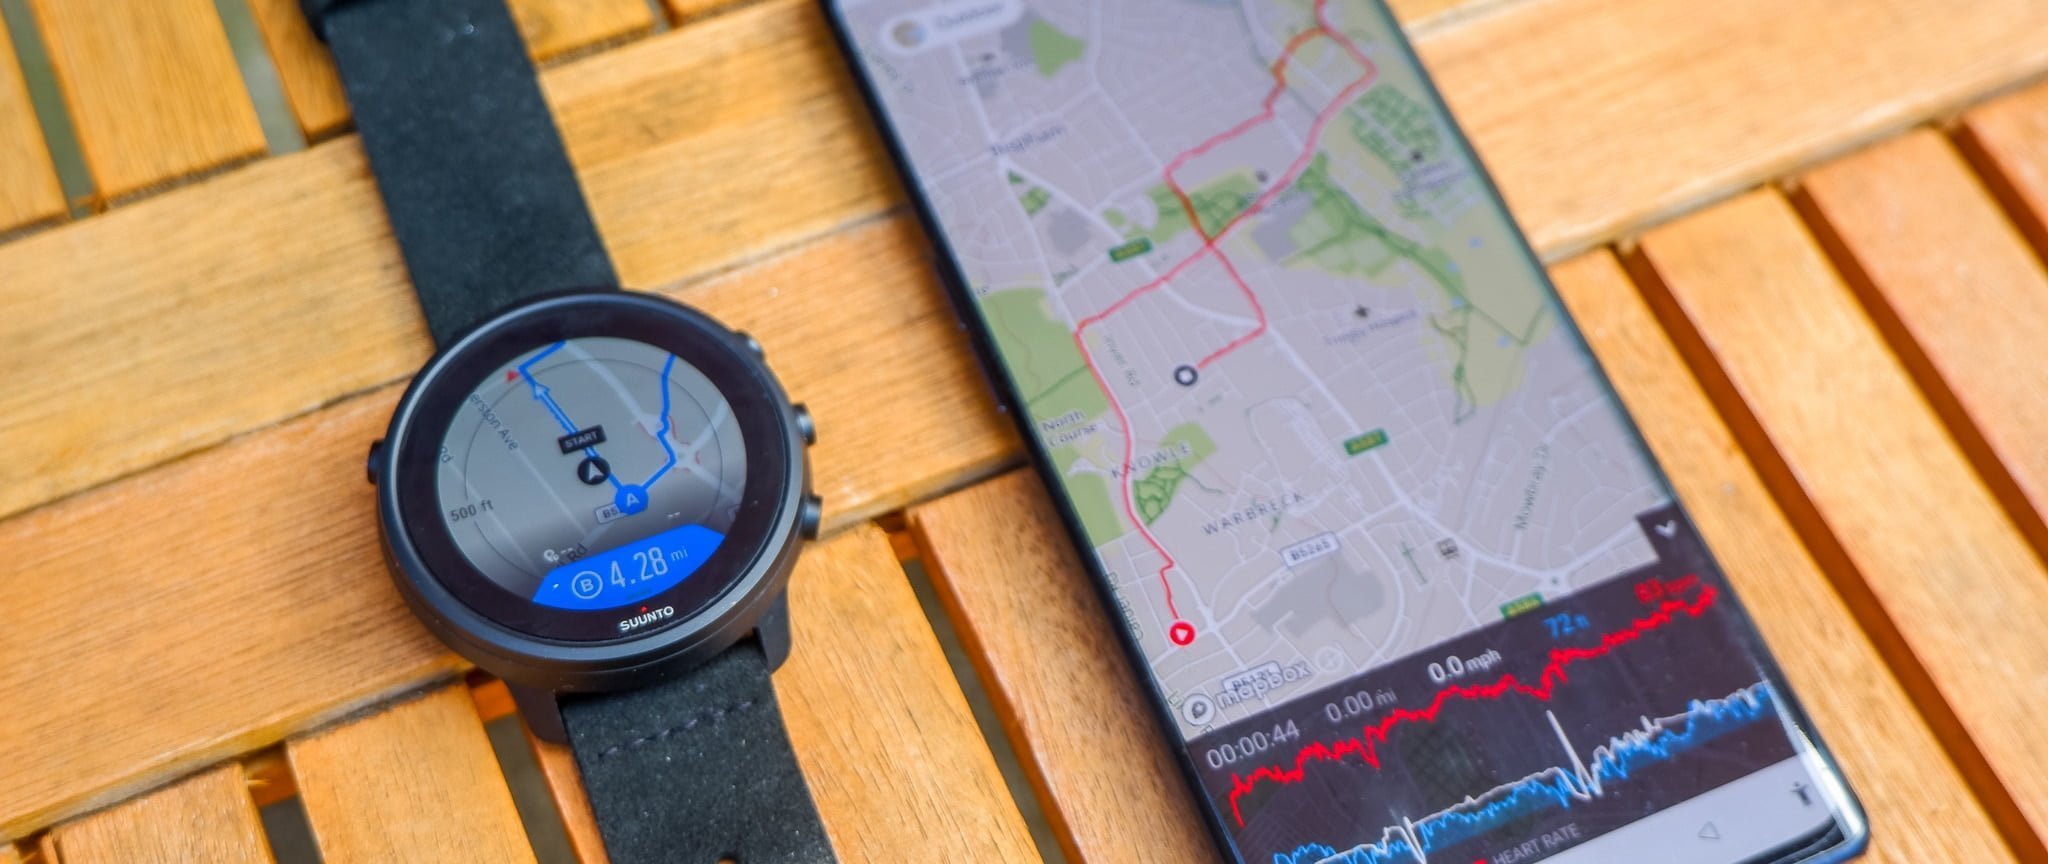 Suunto 7 Titanium Review – A great Wear OS watch but not sure if the titanium is worth the premium